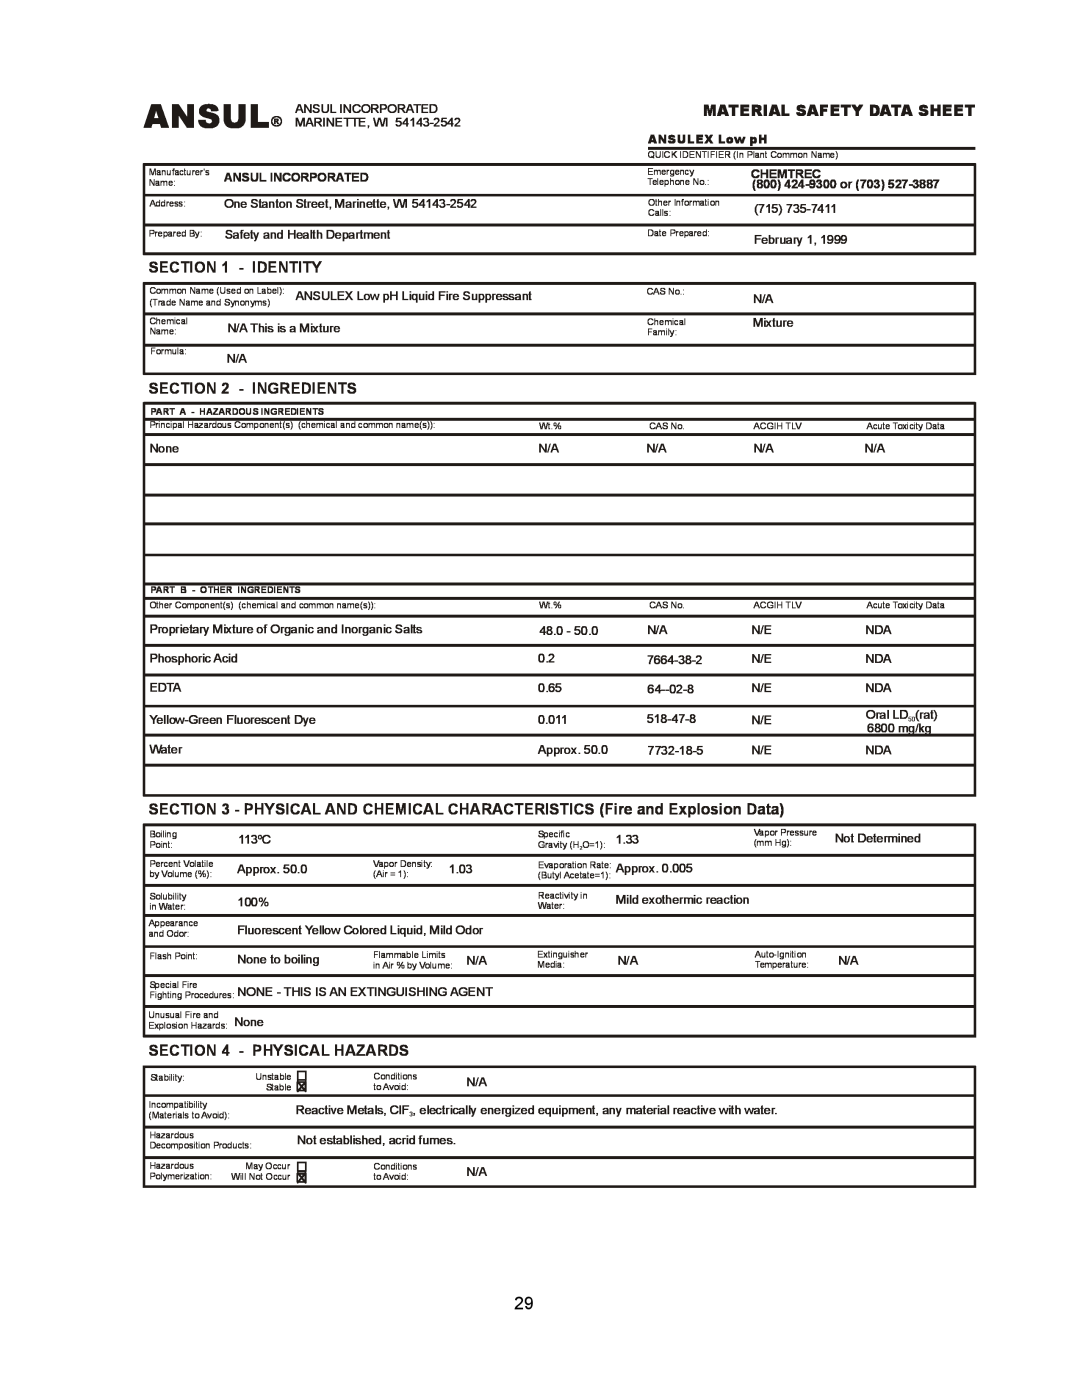 Wells WVF-886 Ansul, Identity, Ingredients, Physical Hazards, Material Safety Data Sheet, ANSULEX Low pH, Chemtrec 